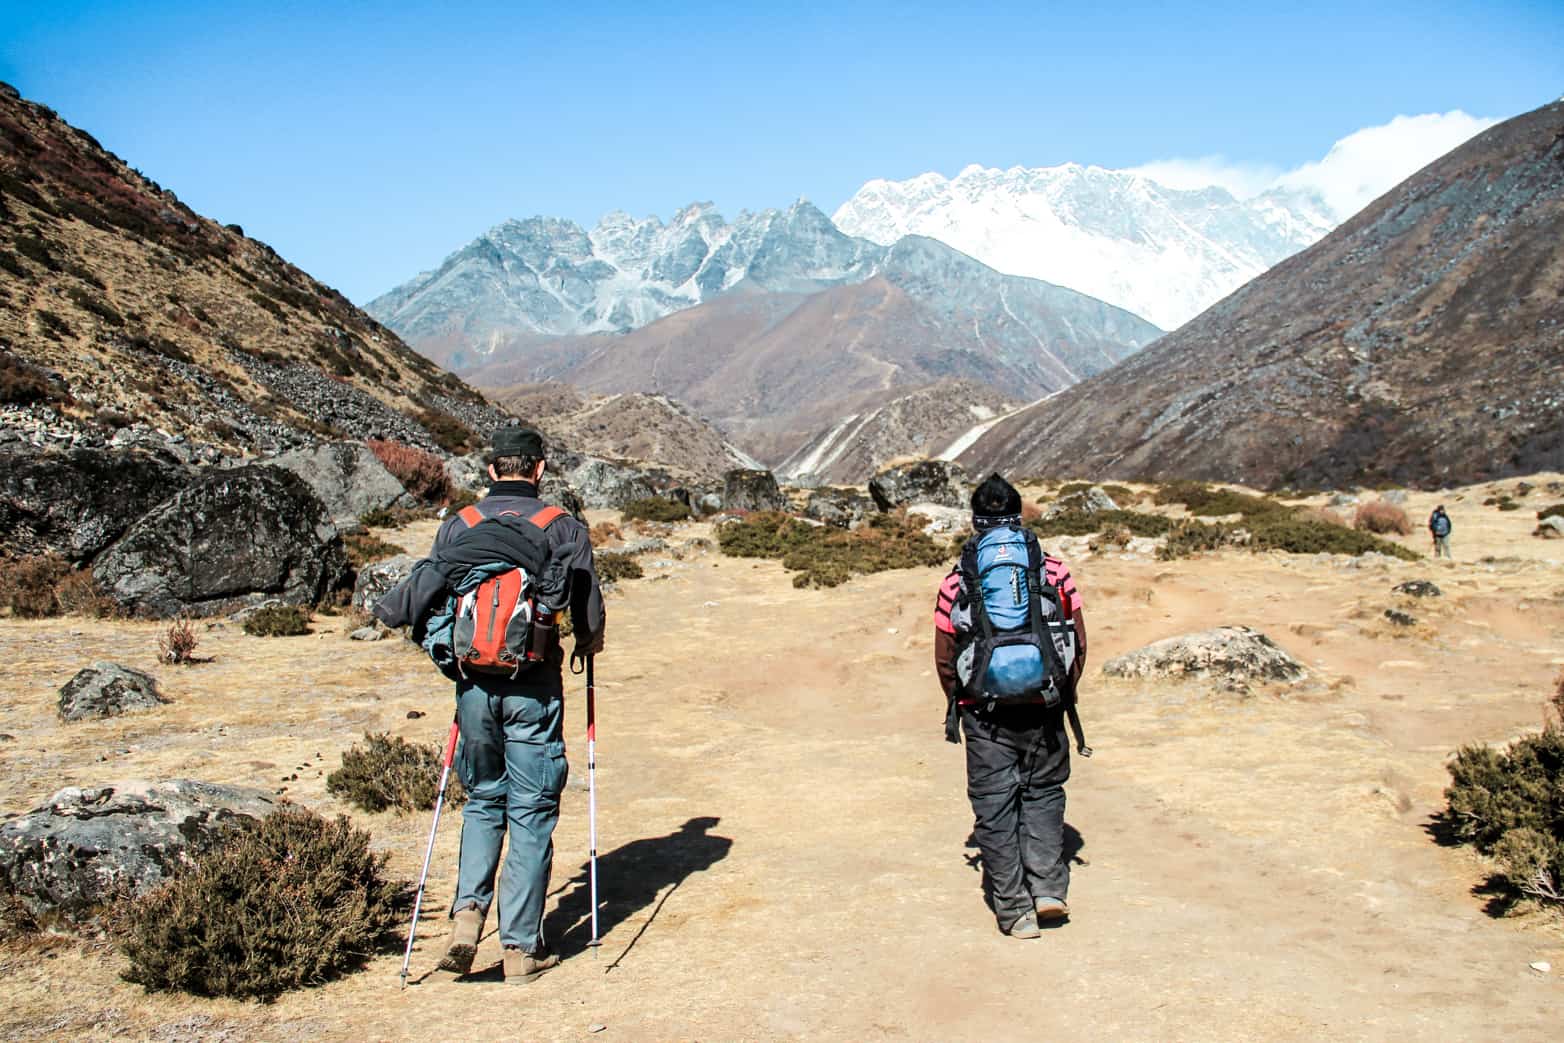 Two men with backpacks walk through the yellow dusty pathway of a wide mountain valley on the Everest Base Camp Trek. They walk towards a grey and white snow-capped mountain ridge, between two brown peaks. 